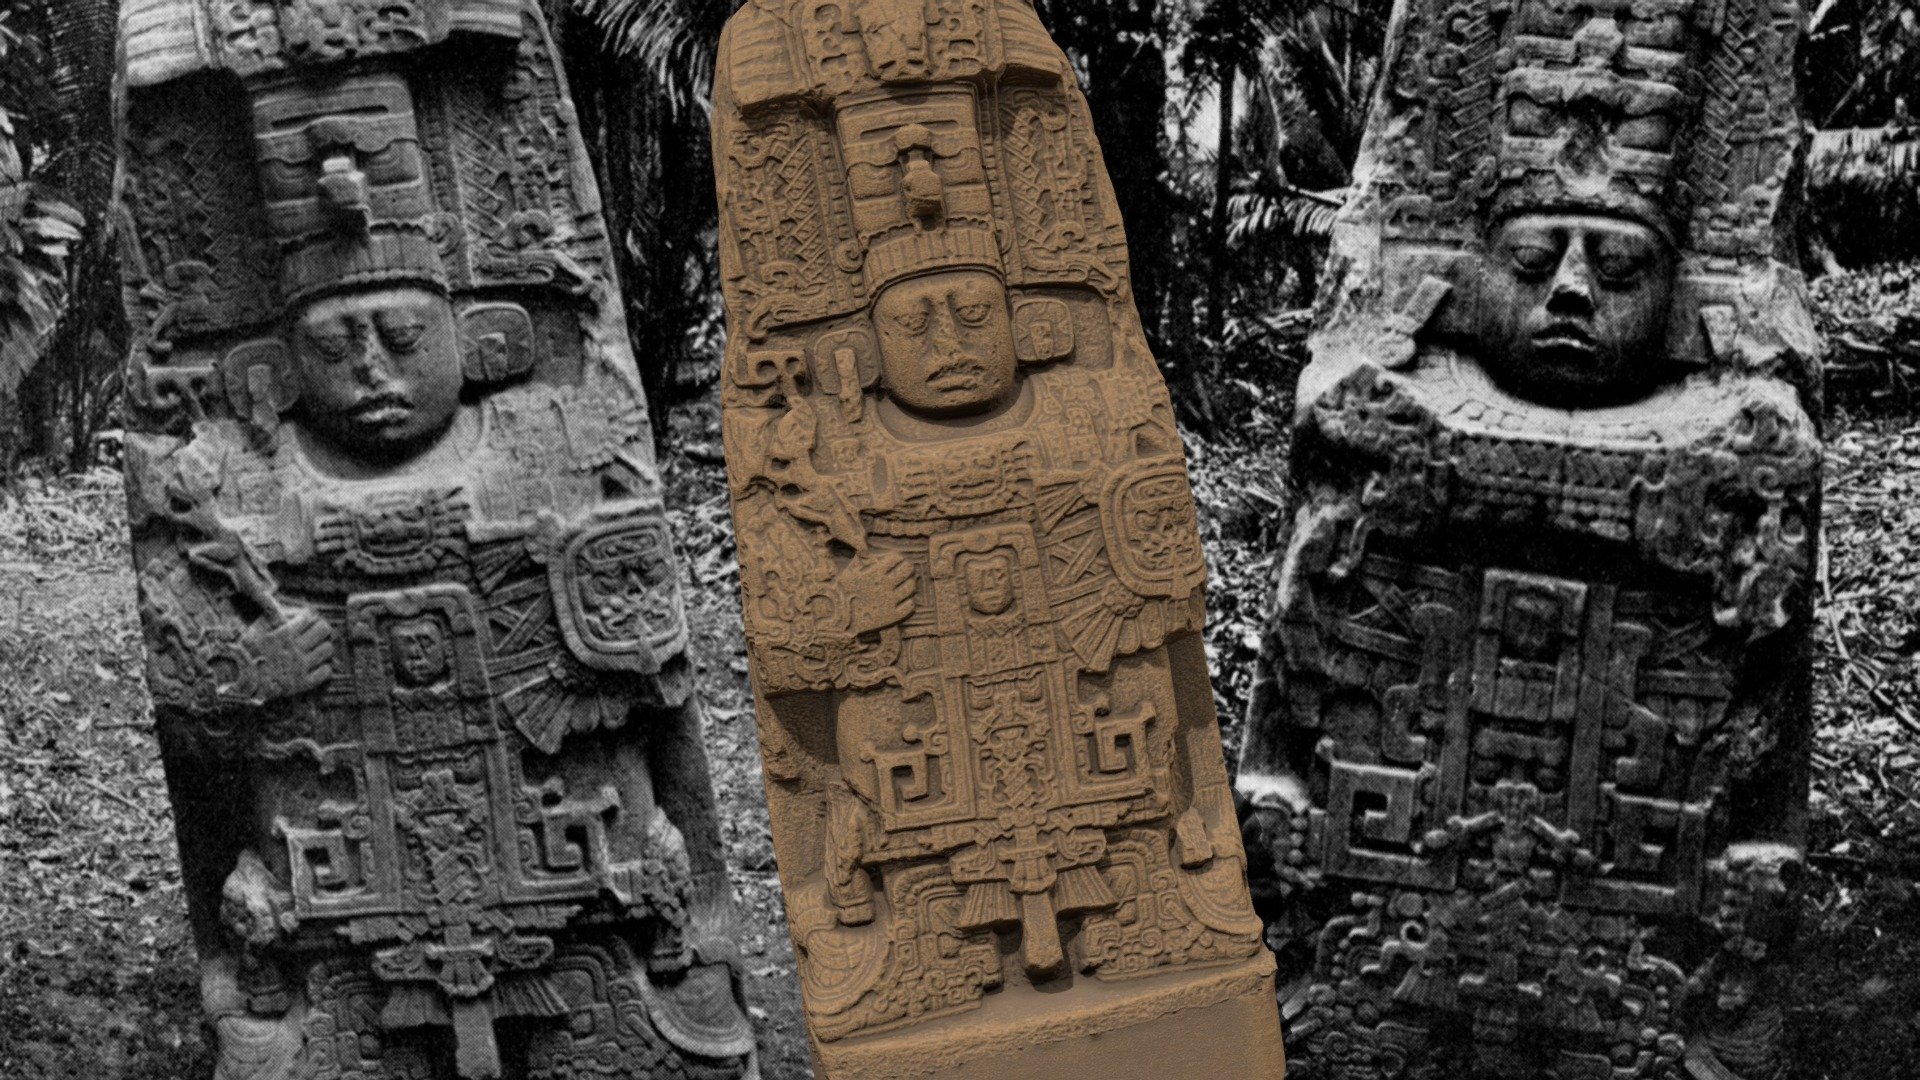 Quirigua Stela K - 3D model shown in relation to c. 1909 image showing west (right) and east (left) sides. This photo was taken during fieldwork at the site by Edgar Hewett, Director of the School of American Archaeology in Santa Fe, New Mexico. This carved stone monument is from the Maya site of Quirigua, Department of Izabal, Guatemala (UNESCO World Heritage site). Working in collaboration with Guatemalan archaeologists and site management, our team of heritage and 3D specialists are recording thestela and carvings as well as terrain and site landscape details. Project attribution: Dirección General del Patrimonio Cultural y Natural del Ministerio de Cultura y Deportes, and the Quiriguá Archaeological Park and Ruins.
See: Matthew Looper's Quirigua: A Guide to an Ancient Maya City, 2007 for more discussion and additional references). For more on our project: [https://dhhc.lib.usf.edu/project/the-quirigua-3d-project/]. Project in collaboration with Oswaldo Gomez, Administrador at Parque Arqueológico Quiriguá 3d model